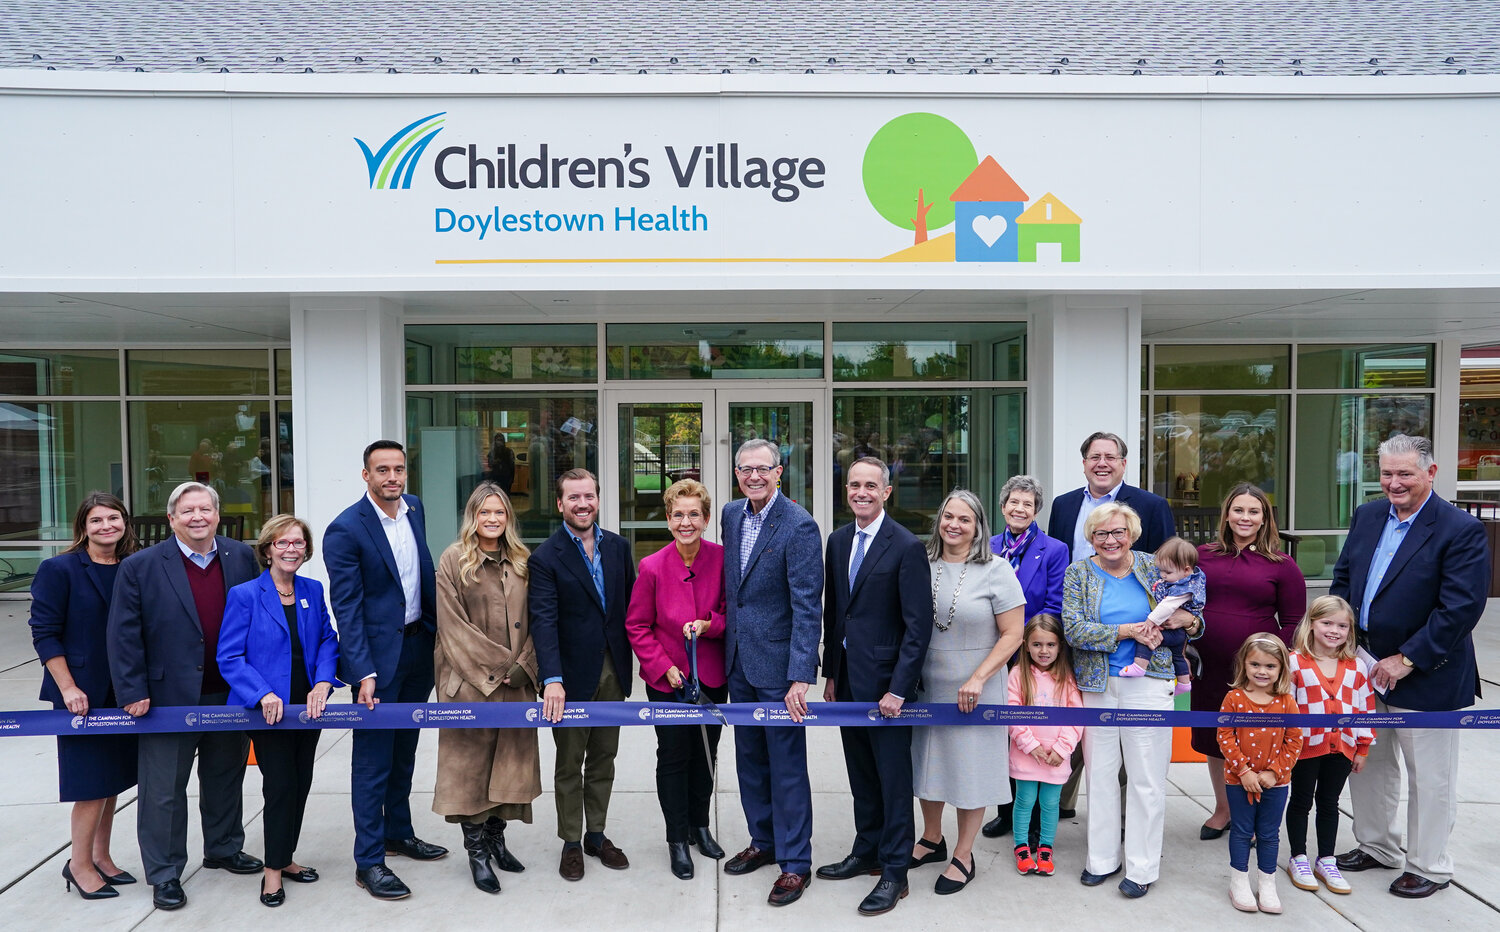 From left to right, Doylestown Health VP and Chief Advancement Officer Laura Wortman, President and CEO Jim Brexler, VIA President Helen Hammes, District Director for U.S. Rep. Brian Fitzpatrick, Kyle Melander, Children’s Village Leadership Donors Haley Torrey and Nick Gorsky, Jeanne Hubbard, John Hubbard, State Sen. Steve Santarsiero, Children’s Village Director Bernadette Rodrigo, Chair of the Boards, Doylestown Hospital and Doylestown Health Foundation, Marianne Chabot, VP and Chief Human Resources Officer Barbara Hebel (with grandchildren, who are Children’s Village students), state Rep. Tim Brennan, state Rep. Shelby Labs, and Director of Integrated Services Ernie Werner (with grandchildren, who are Children’s Village students).